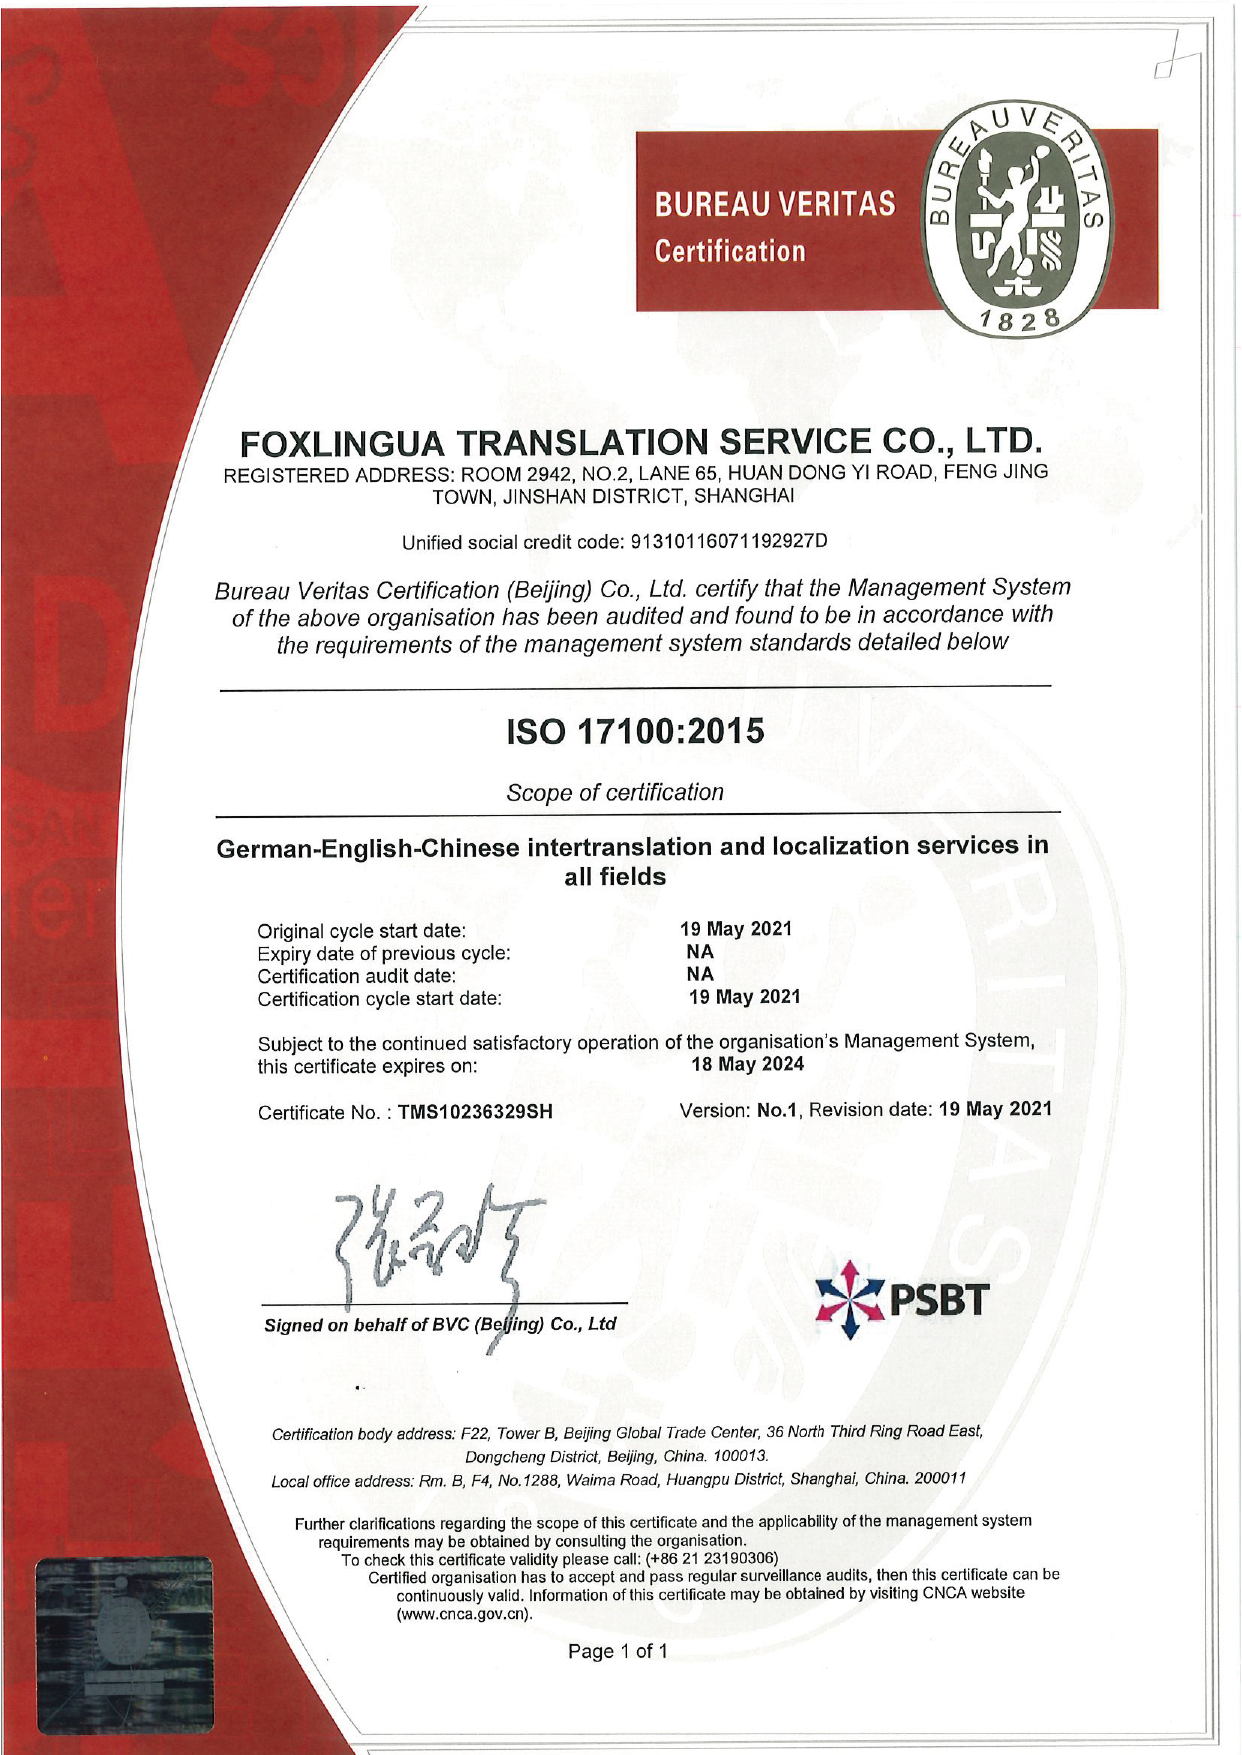 We have passed ISO17100 certification